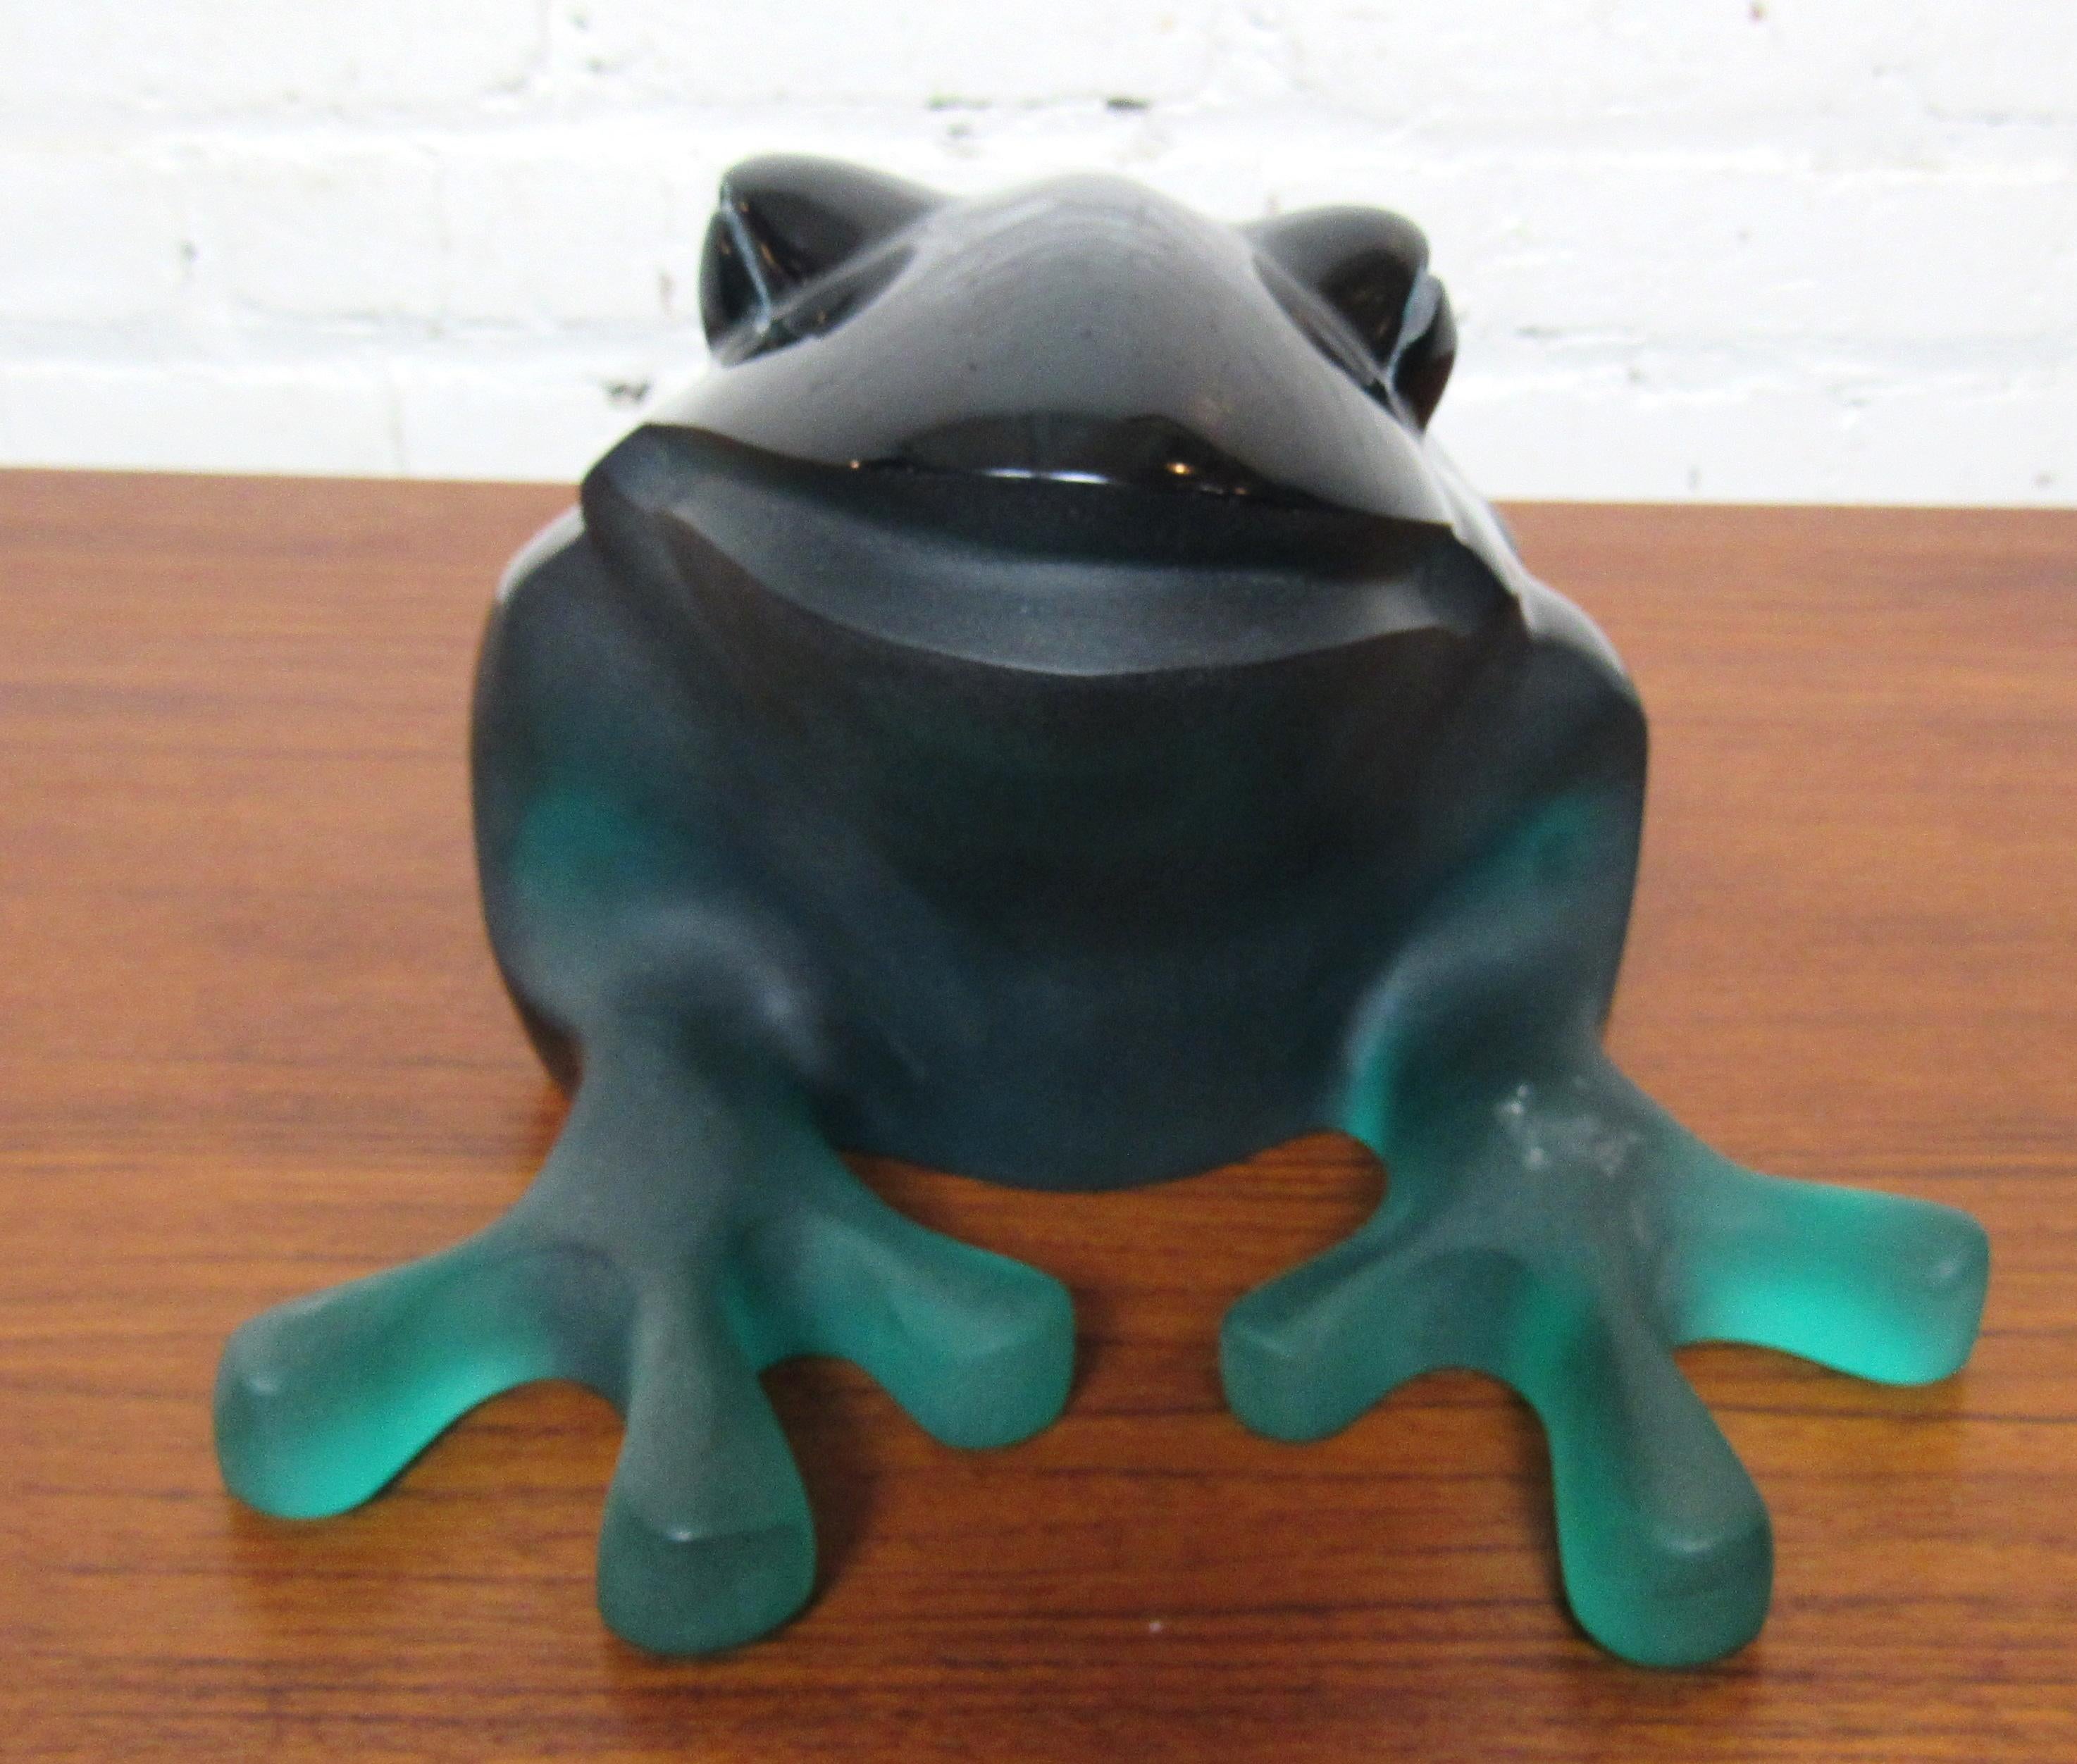 Beautiful sculpture of a frog with polished body and flat acrylic feet.
Location: Brooklyn NY